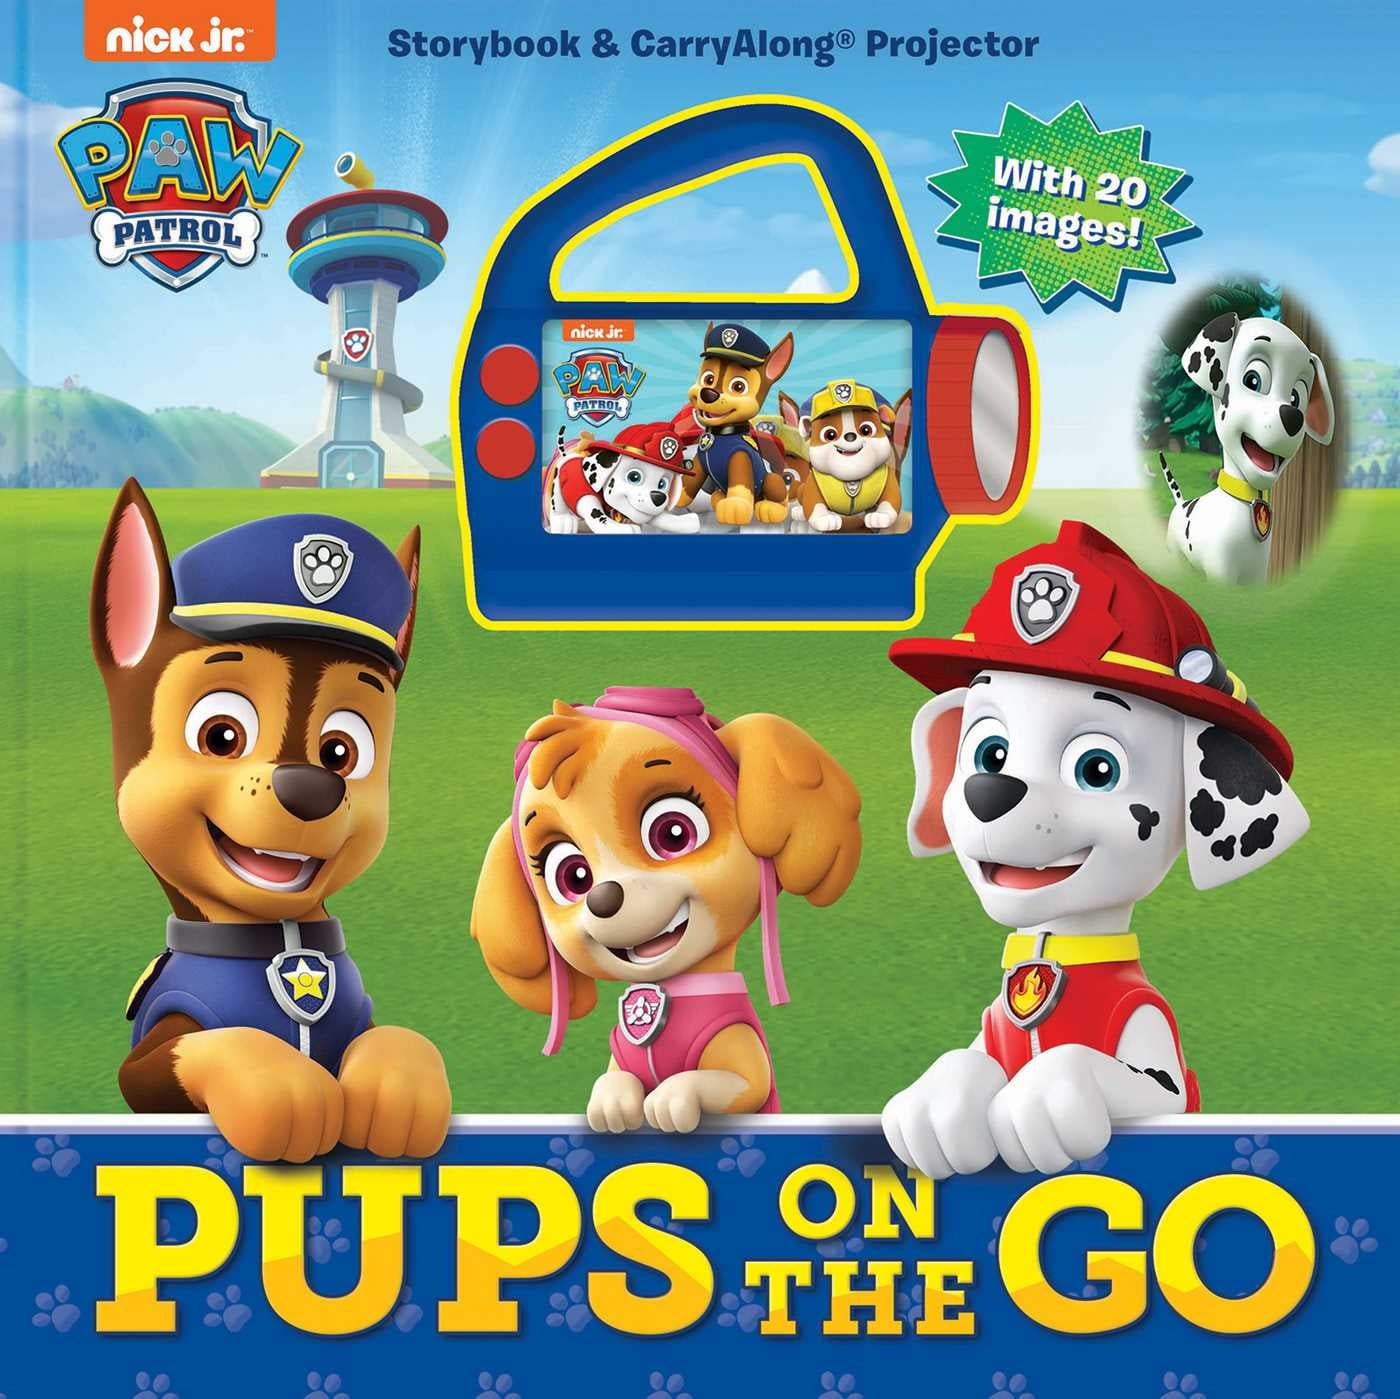 hardware september Tale Nickelodeon PAW Patrol: Pups on the Go CarryAlong Projector - Walmart.com